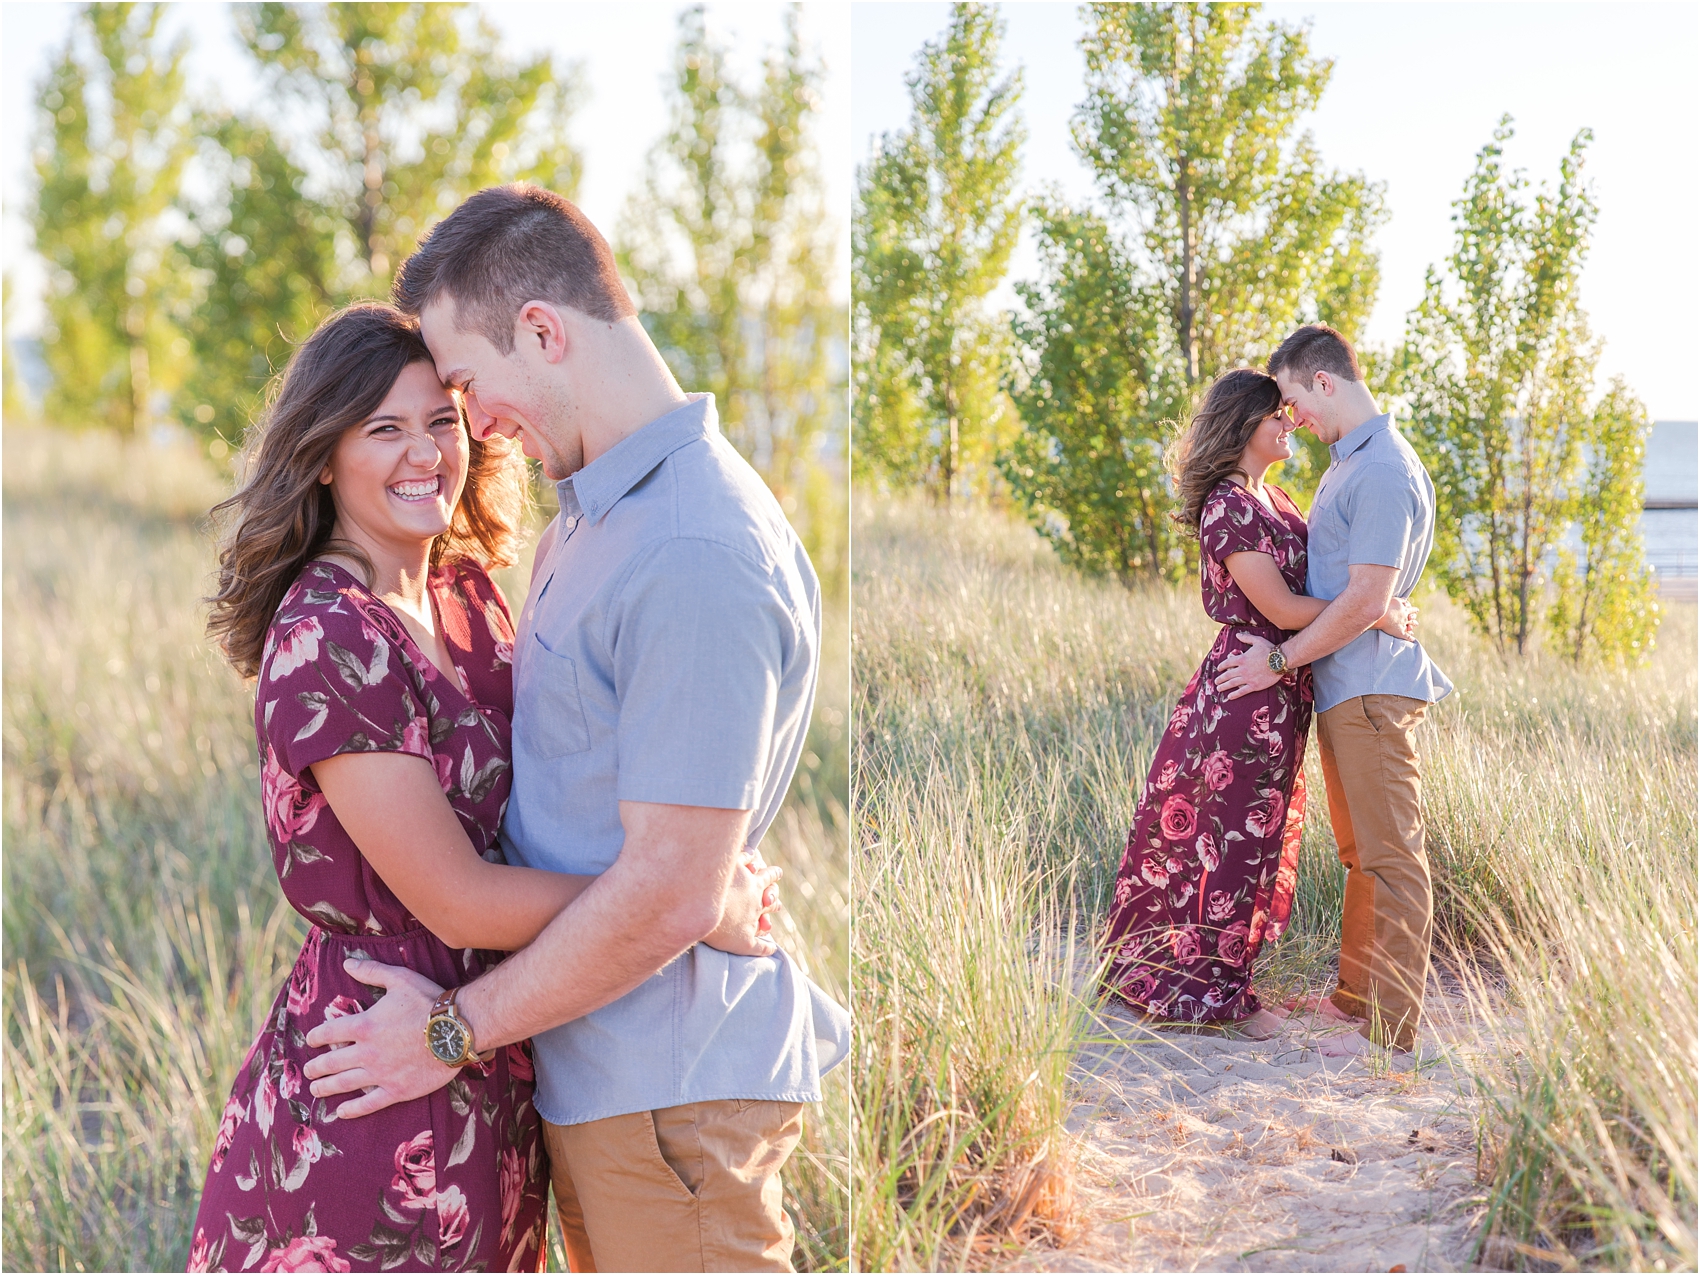 candid-end-of-summer-sunset-engagement-photos-at-silver-beach-in-st-joseph-mi-by-courtney-carolyn-photography_0018.jpg